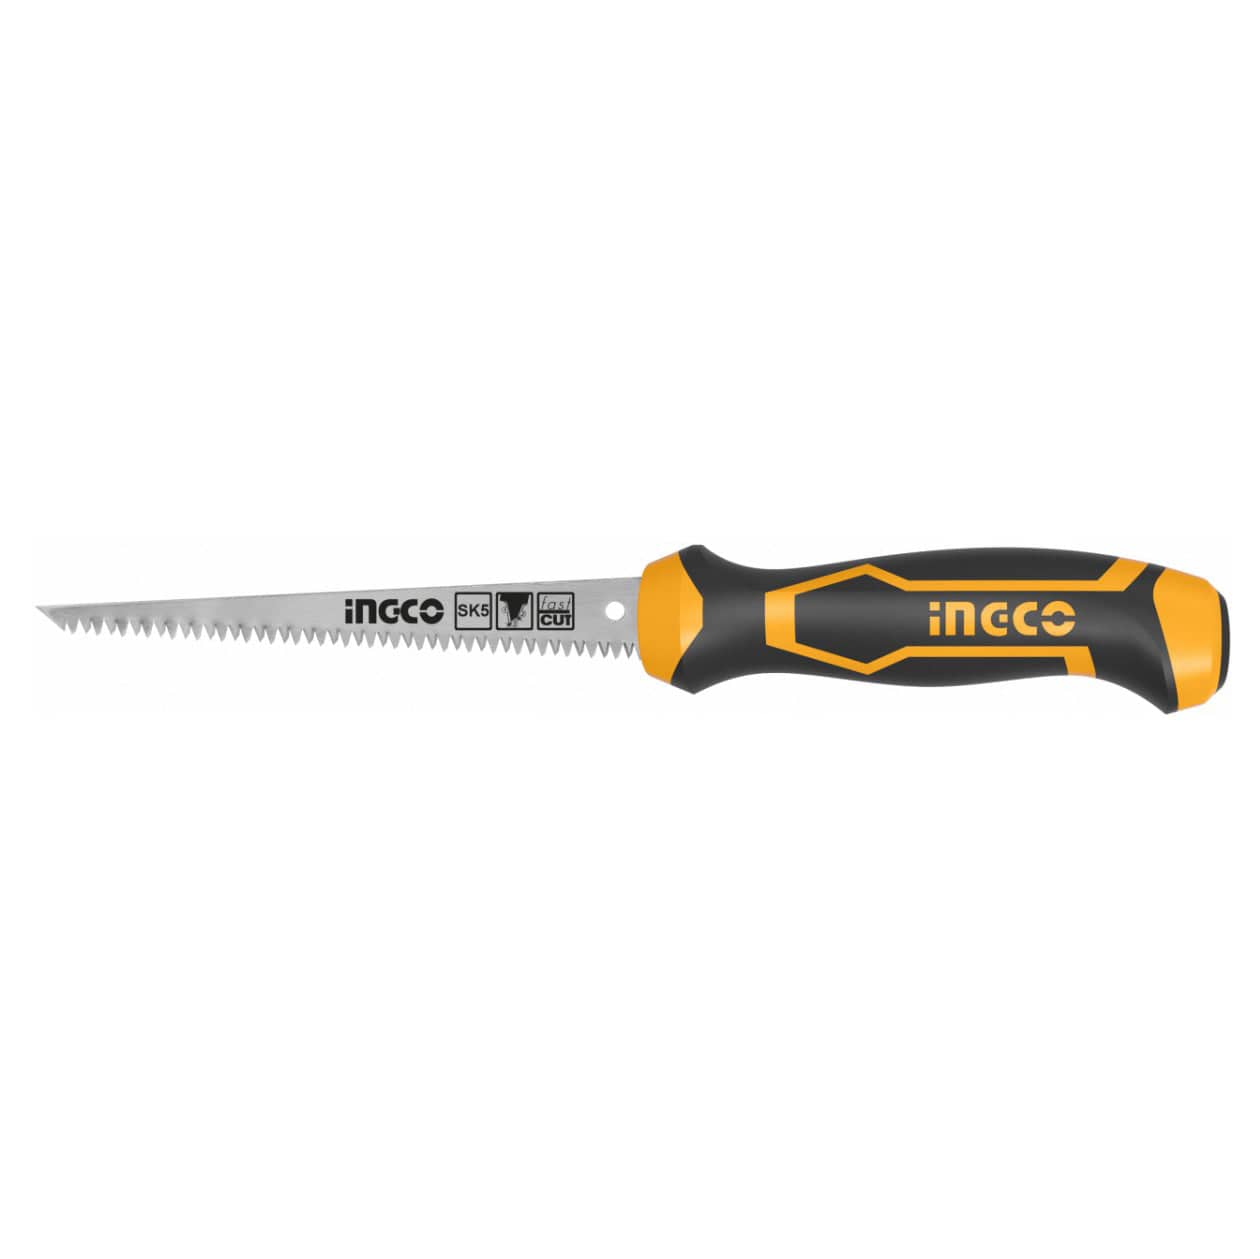 Ingco Wall Board Saw - HWBSW628C | Supply Master | Accra, Ghana Hand Saws & Cutting Tools Buy Tools hardware Building materials